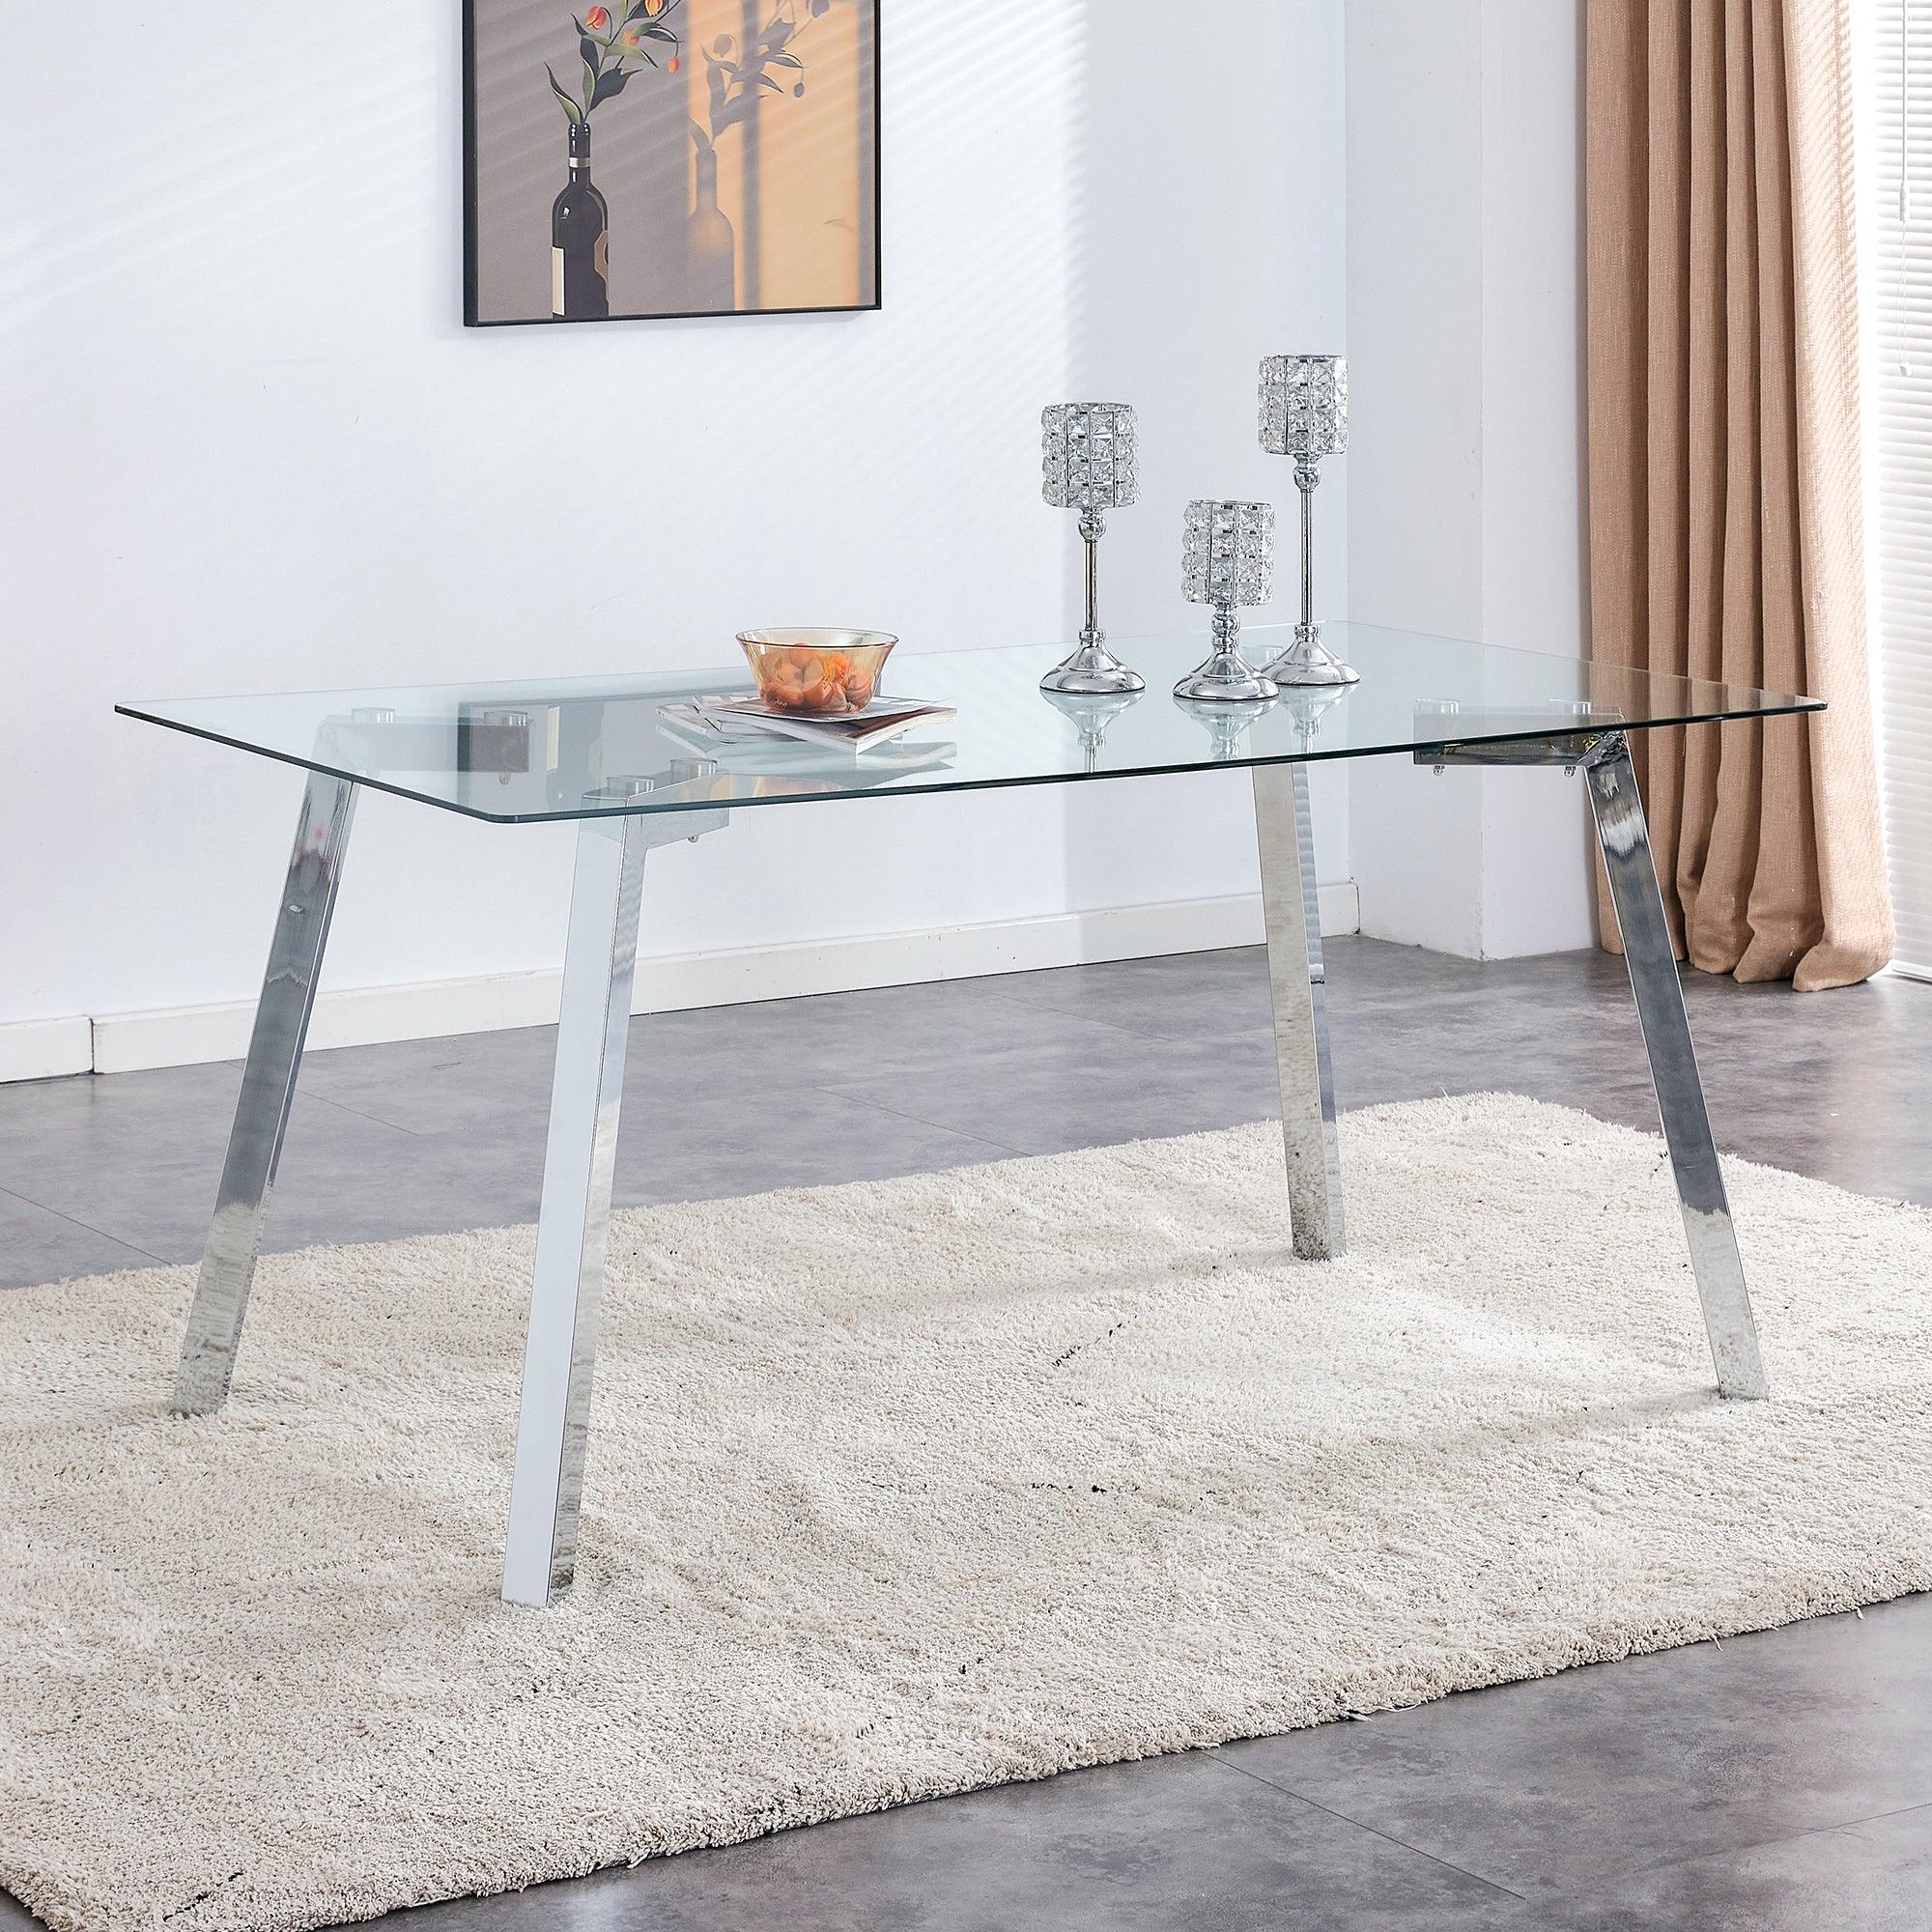 A Modern Minimalist Rectangular Glass Dining Table With Tempered Glass Tabletop And Silver Metal Legs, Suitable For Kitchens, Restaurants, And Living Rooms, 63"*35.4"*30"